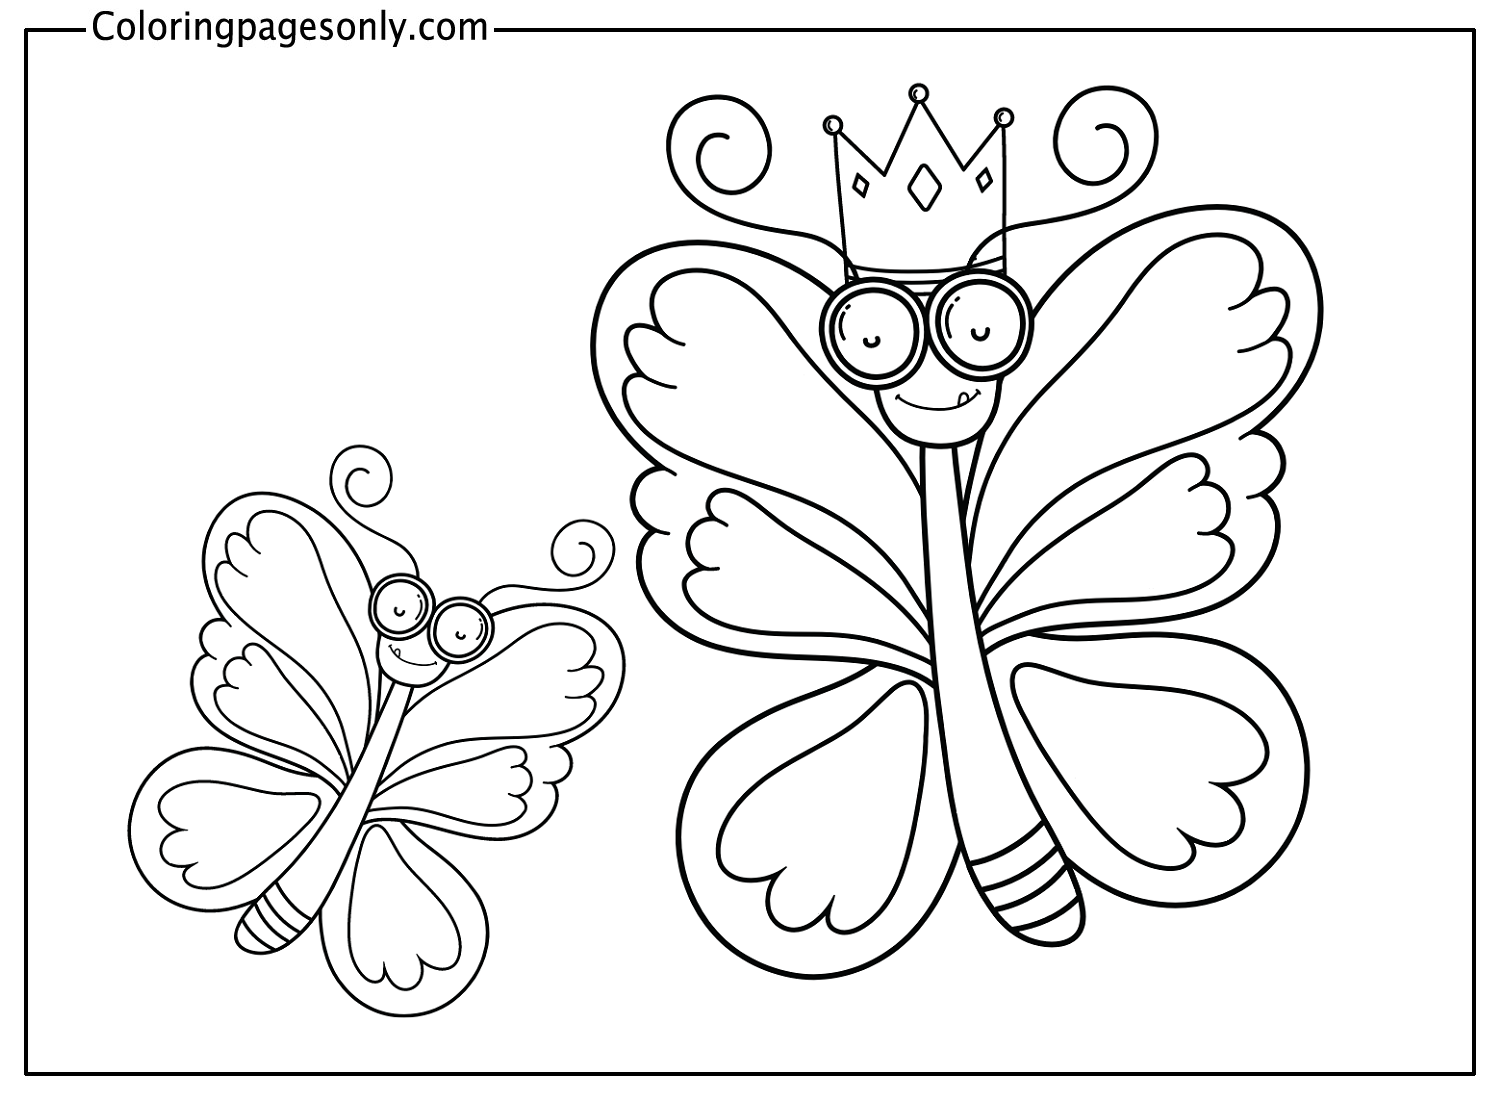 King Butterfly with Little Butterfly Coloring Page